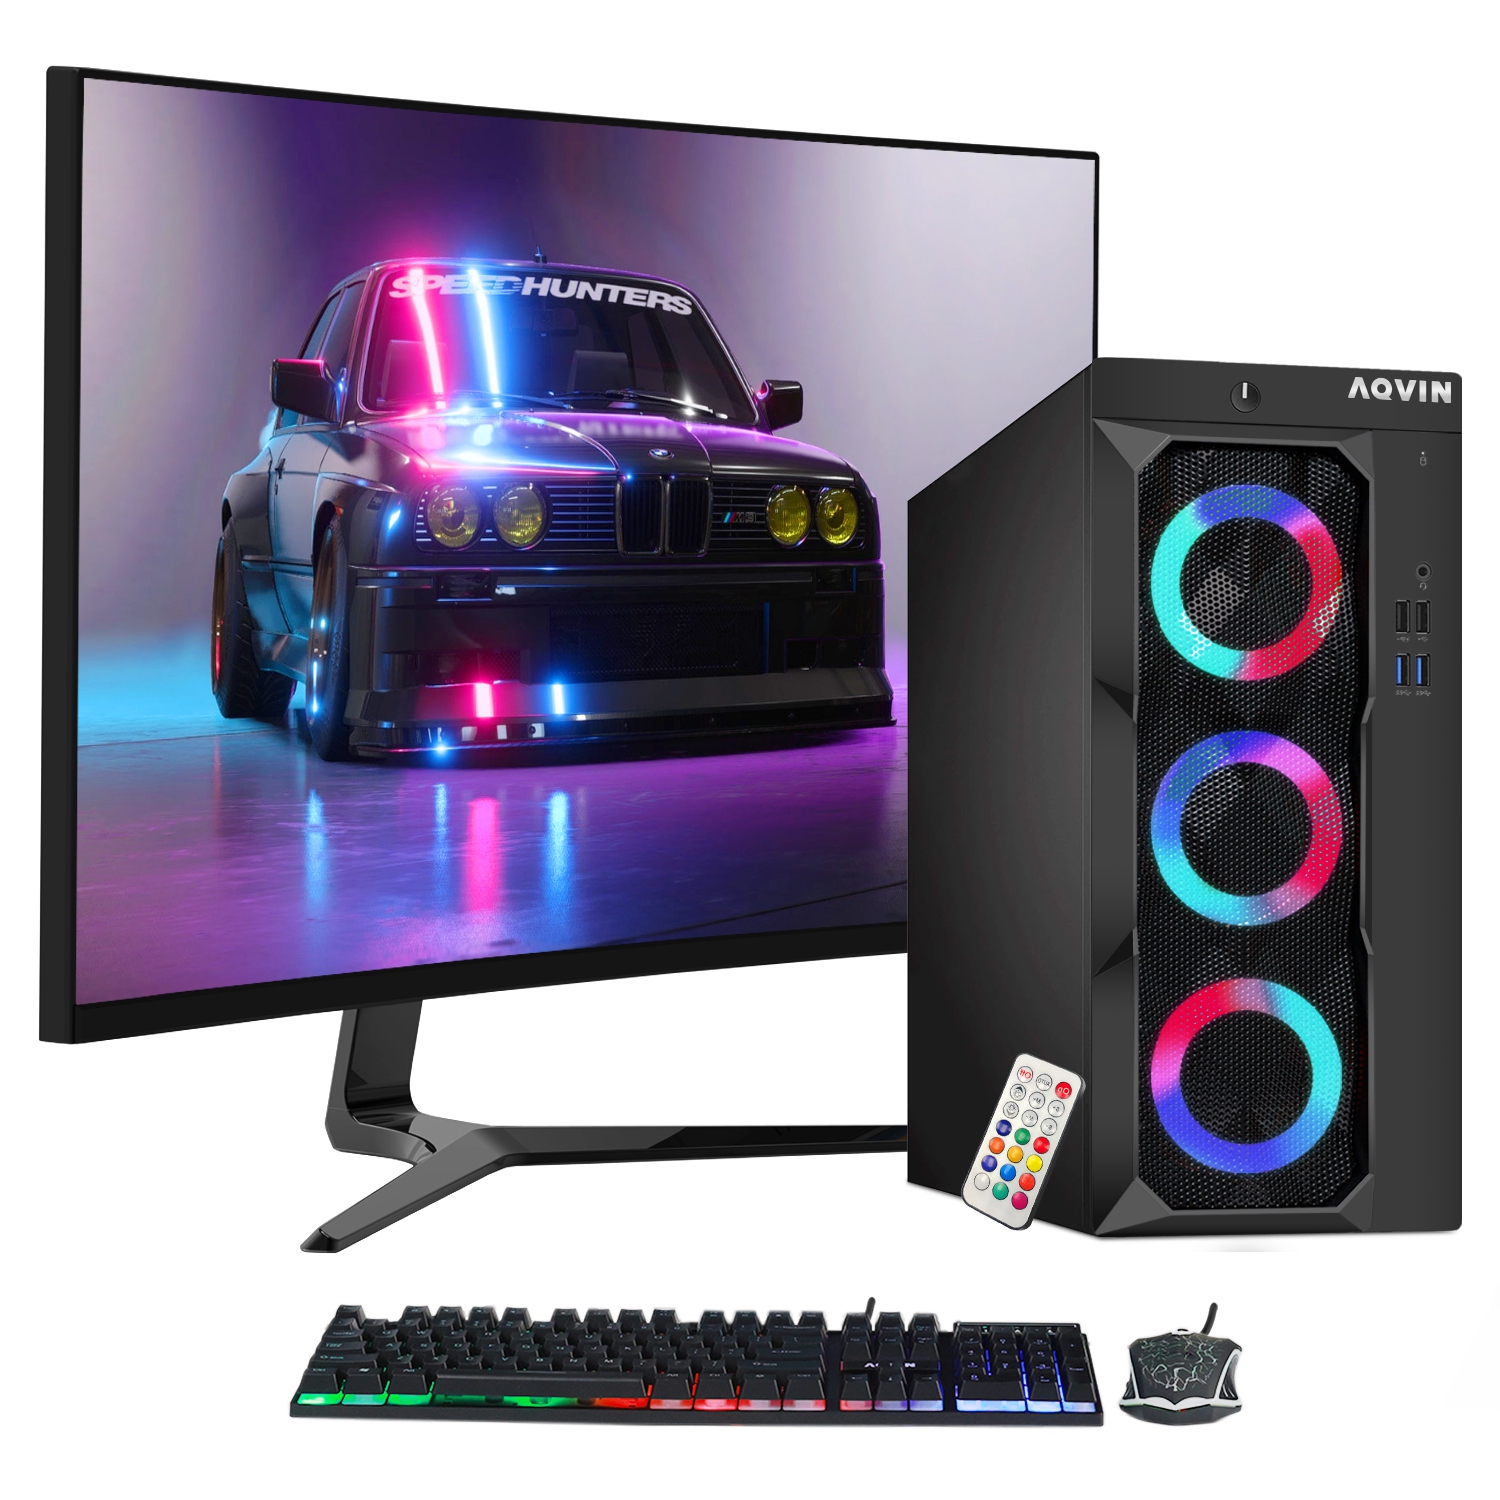 Refurbished (Excellent) - AQVIN LuminaRings Gaming PC Combo Desktop Computer New 27 inch Curved Monitor Intel Core i7 Processor 32GB RAM 2TB SSD AMD RX 550 DDR5 HDMI Windows 10 Pro